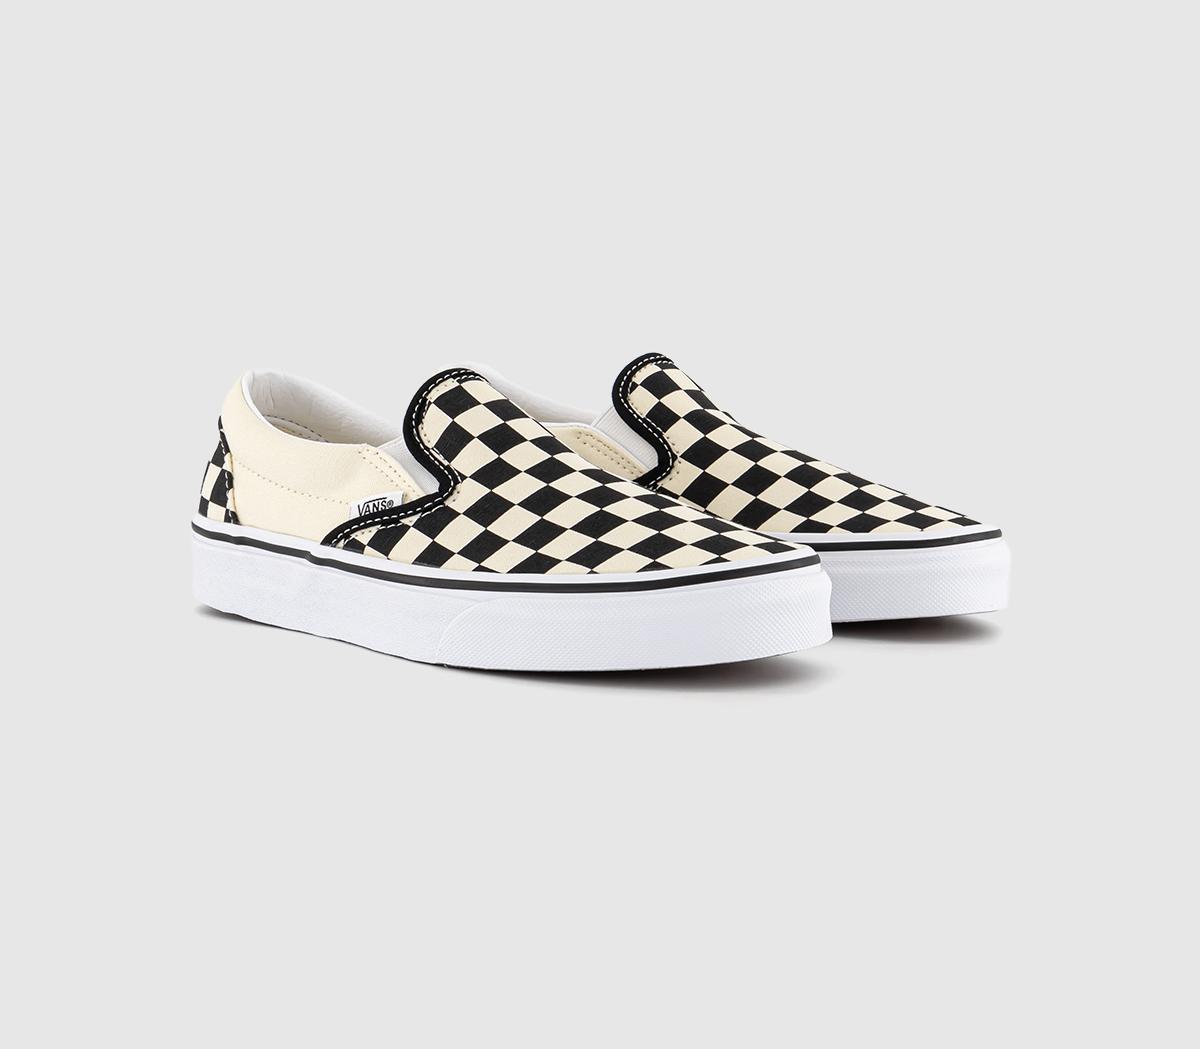 Vans Black And White Canvas Check Classic Slip On Shoes, Size: 7.5